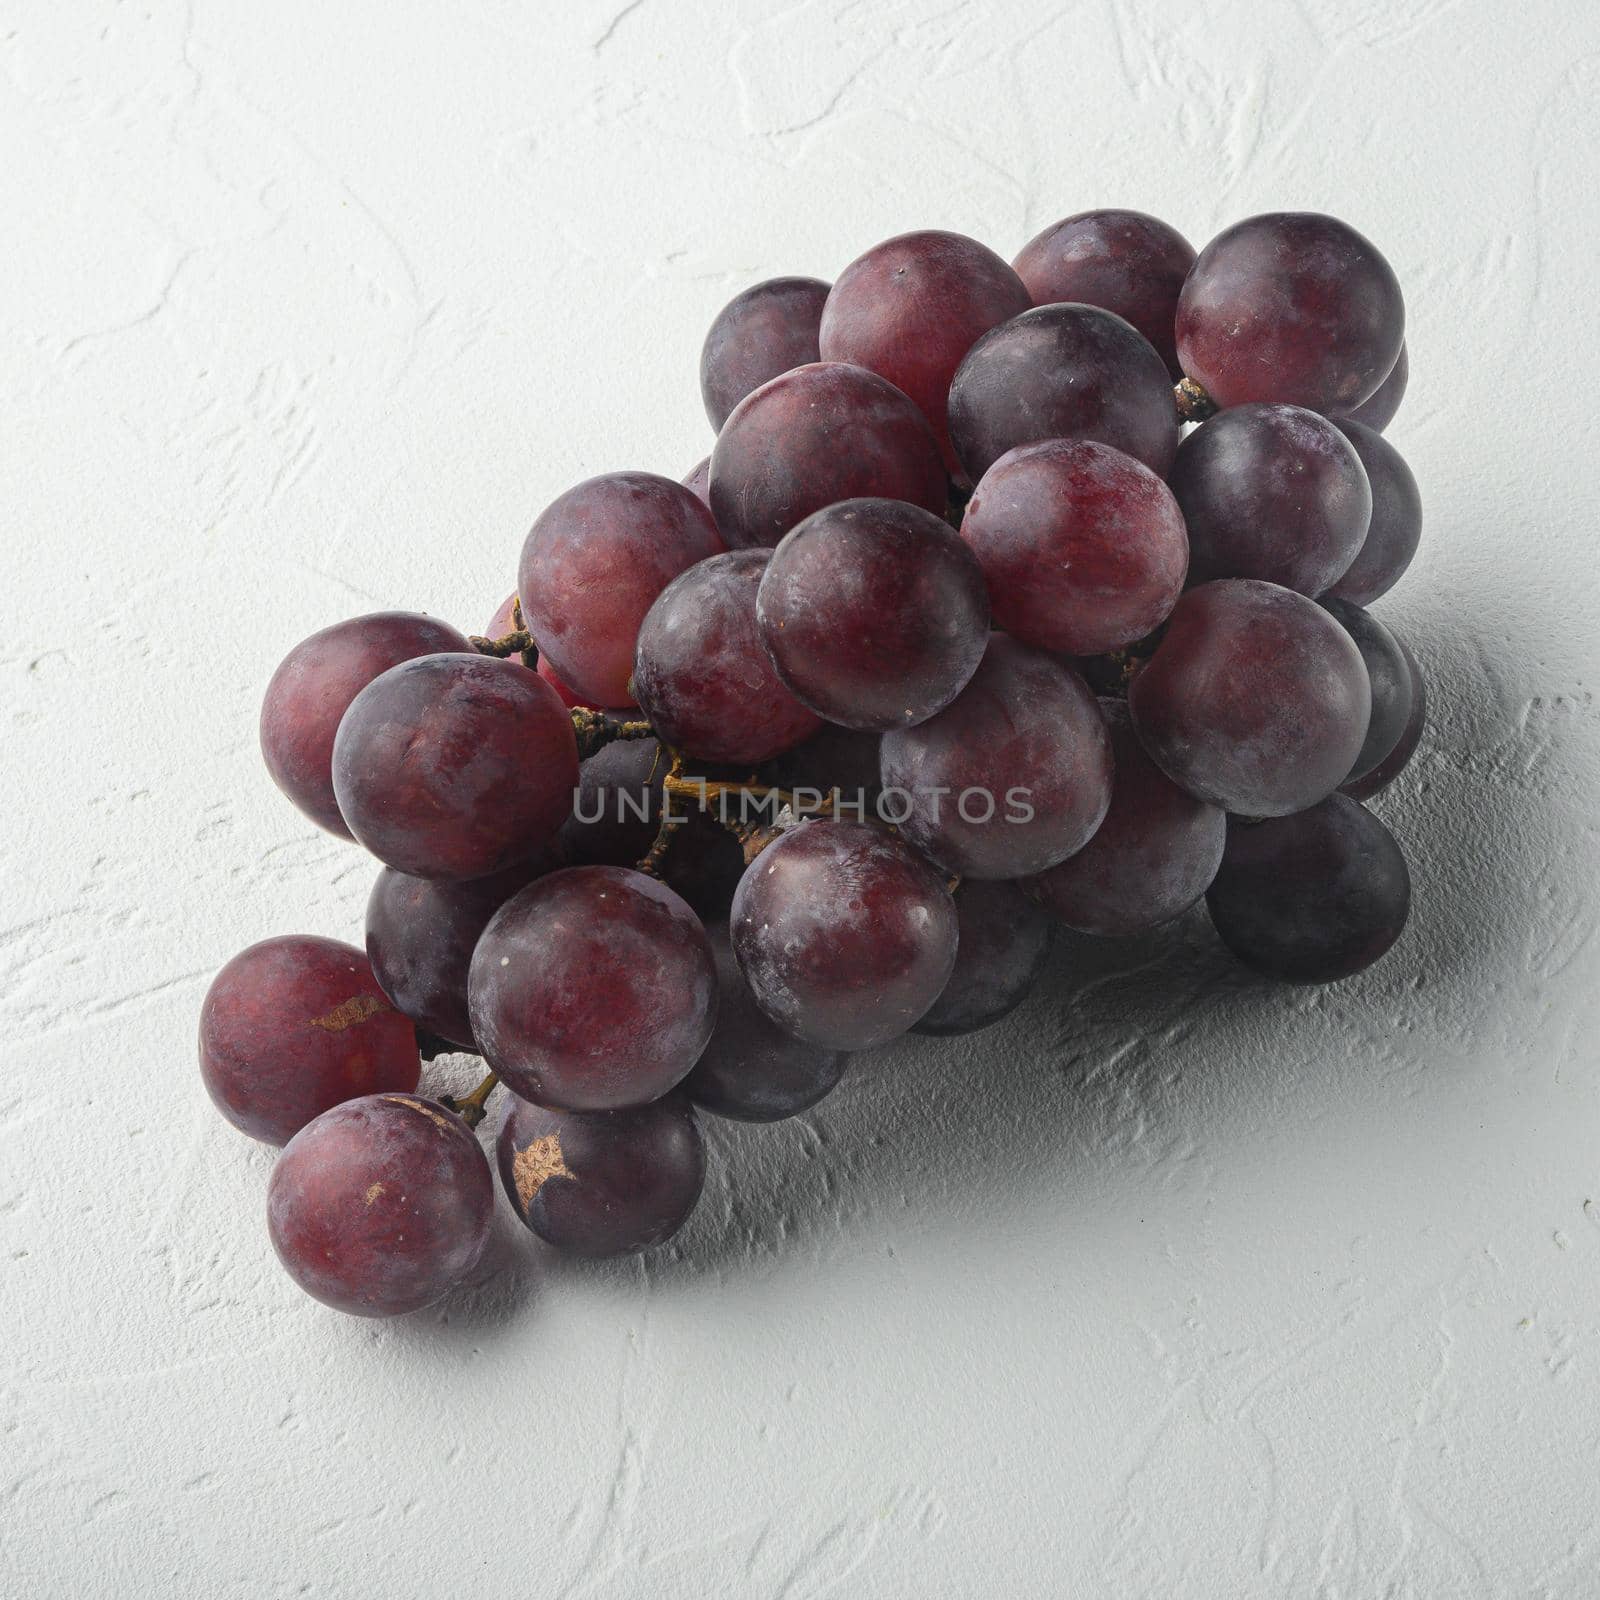 Ripe grape, dark red fruits, square format, on white stone background by Ilianesolenyi